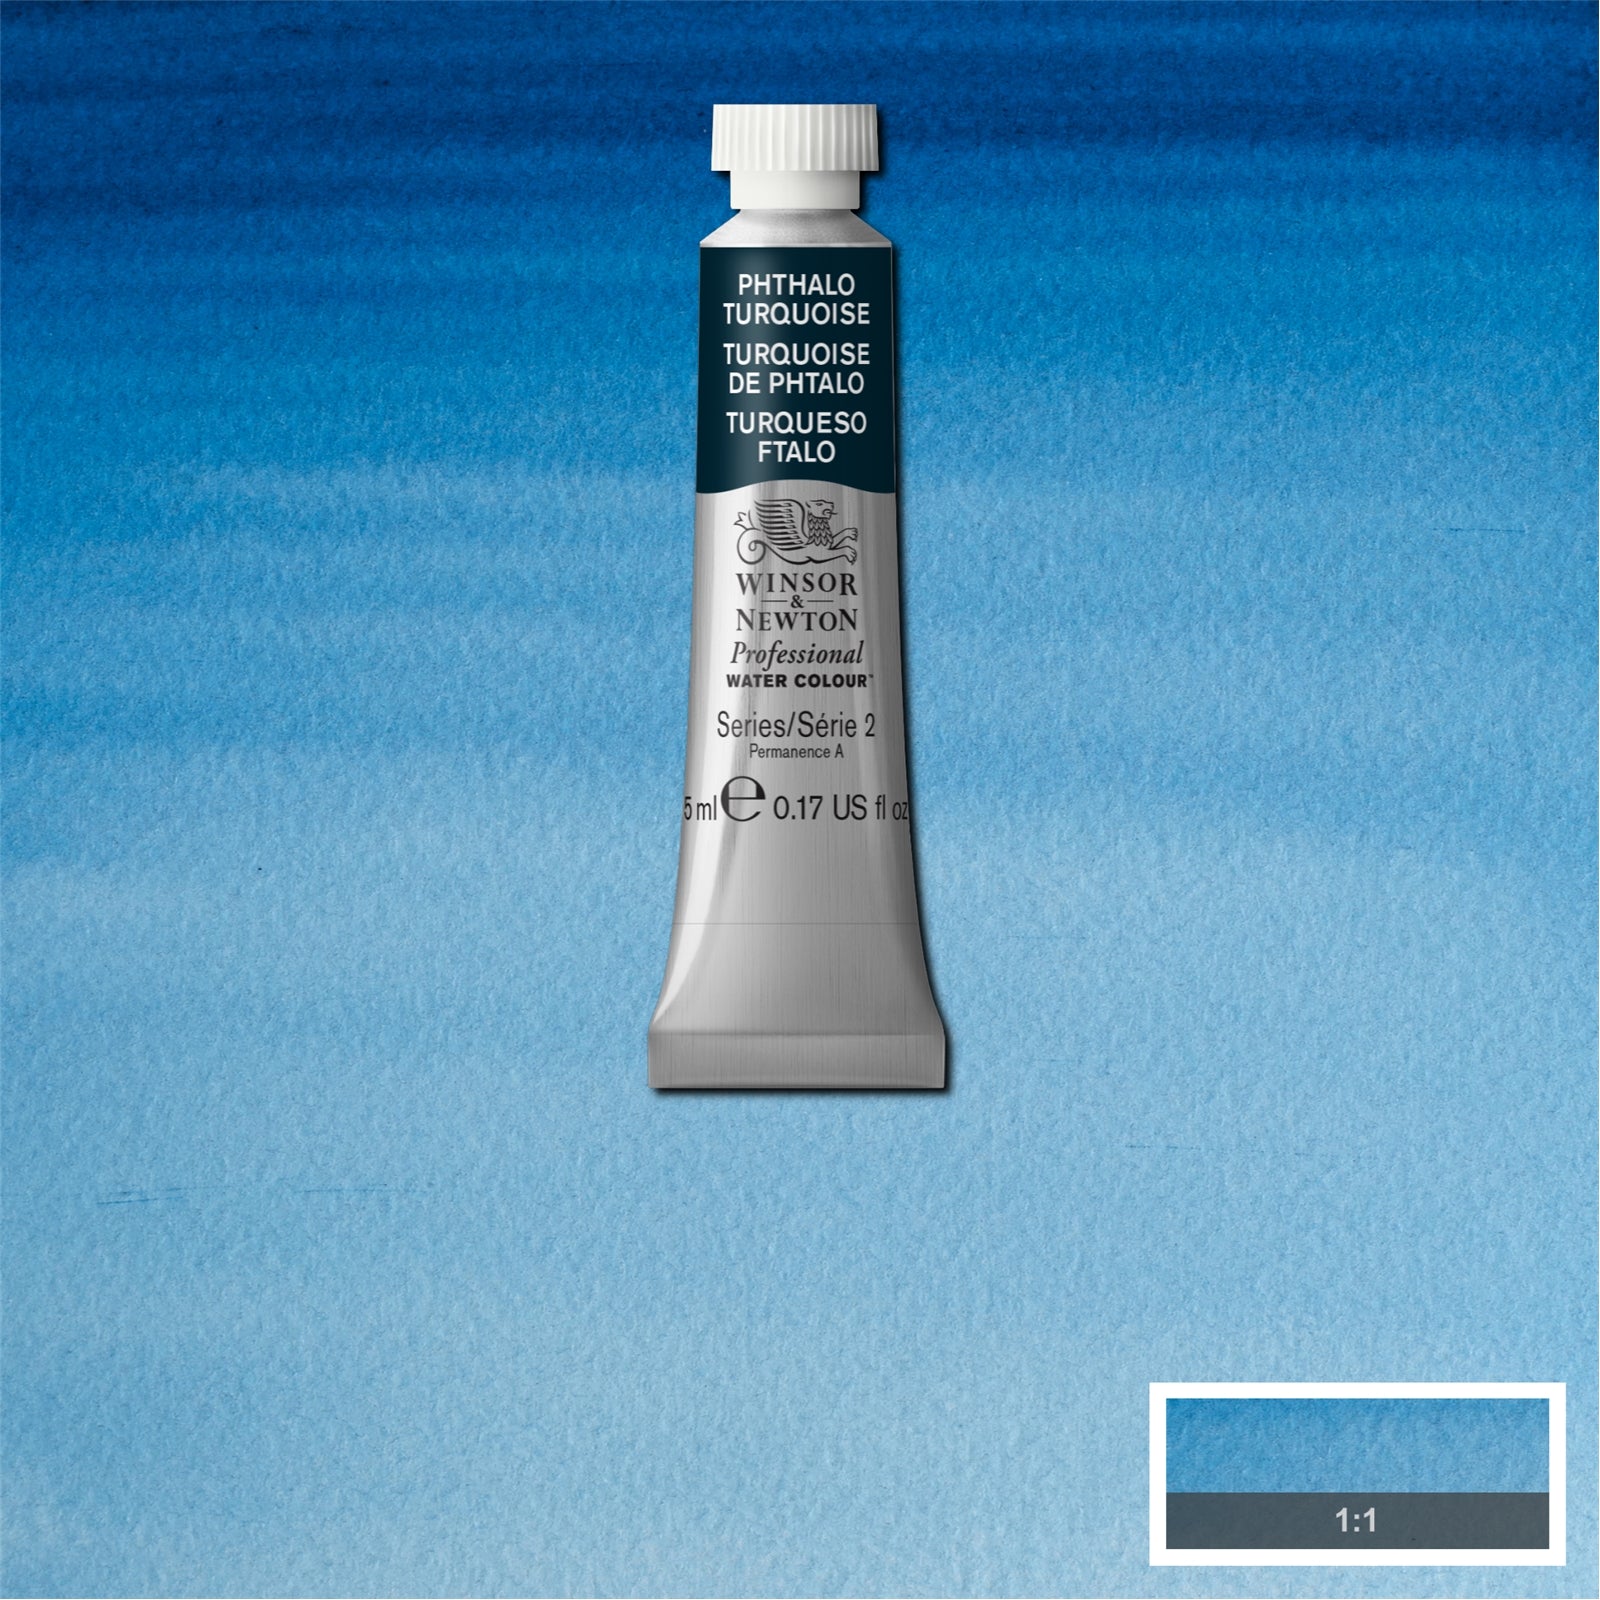 Winsor and Newton - Professional Artists' Watercolour - 5ml - Phthalo Turquoise